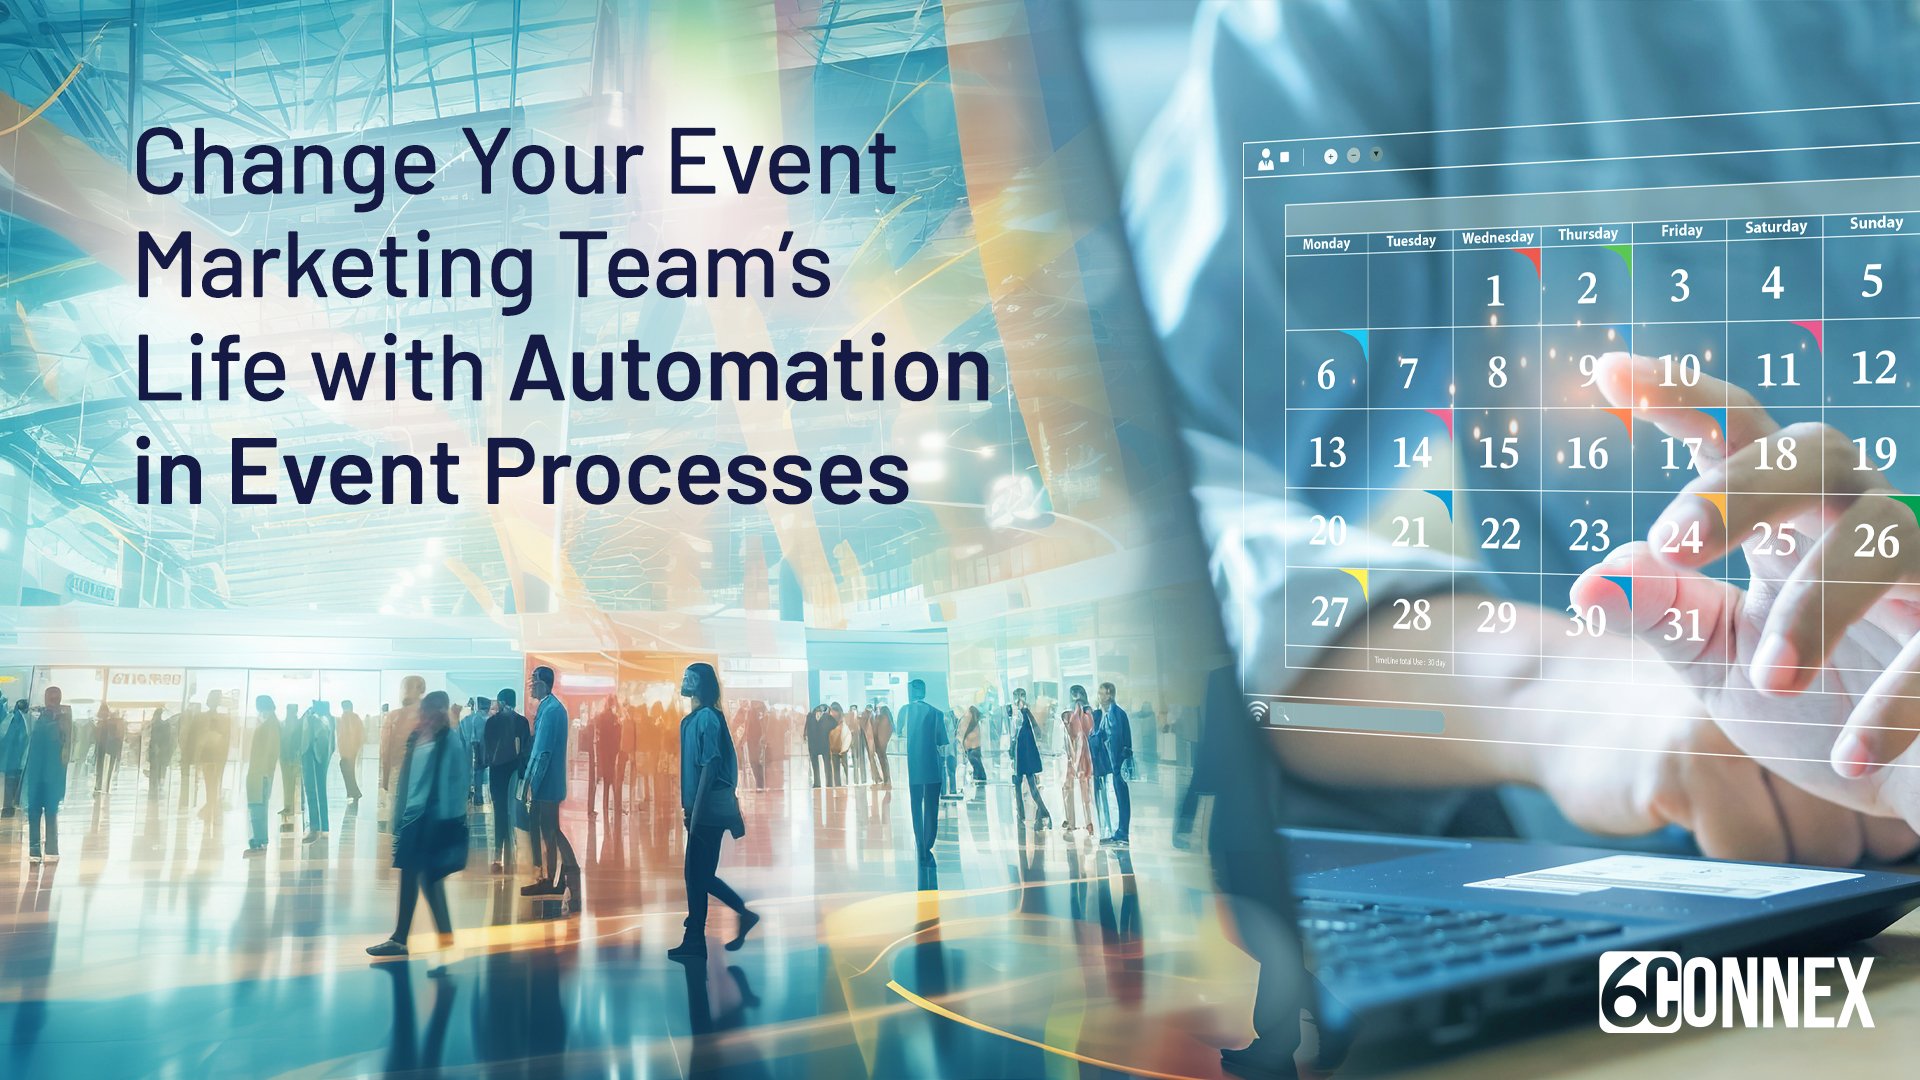 Change Your Event Marketing Team’s Life with Automation in Event Processes